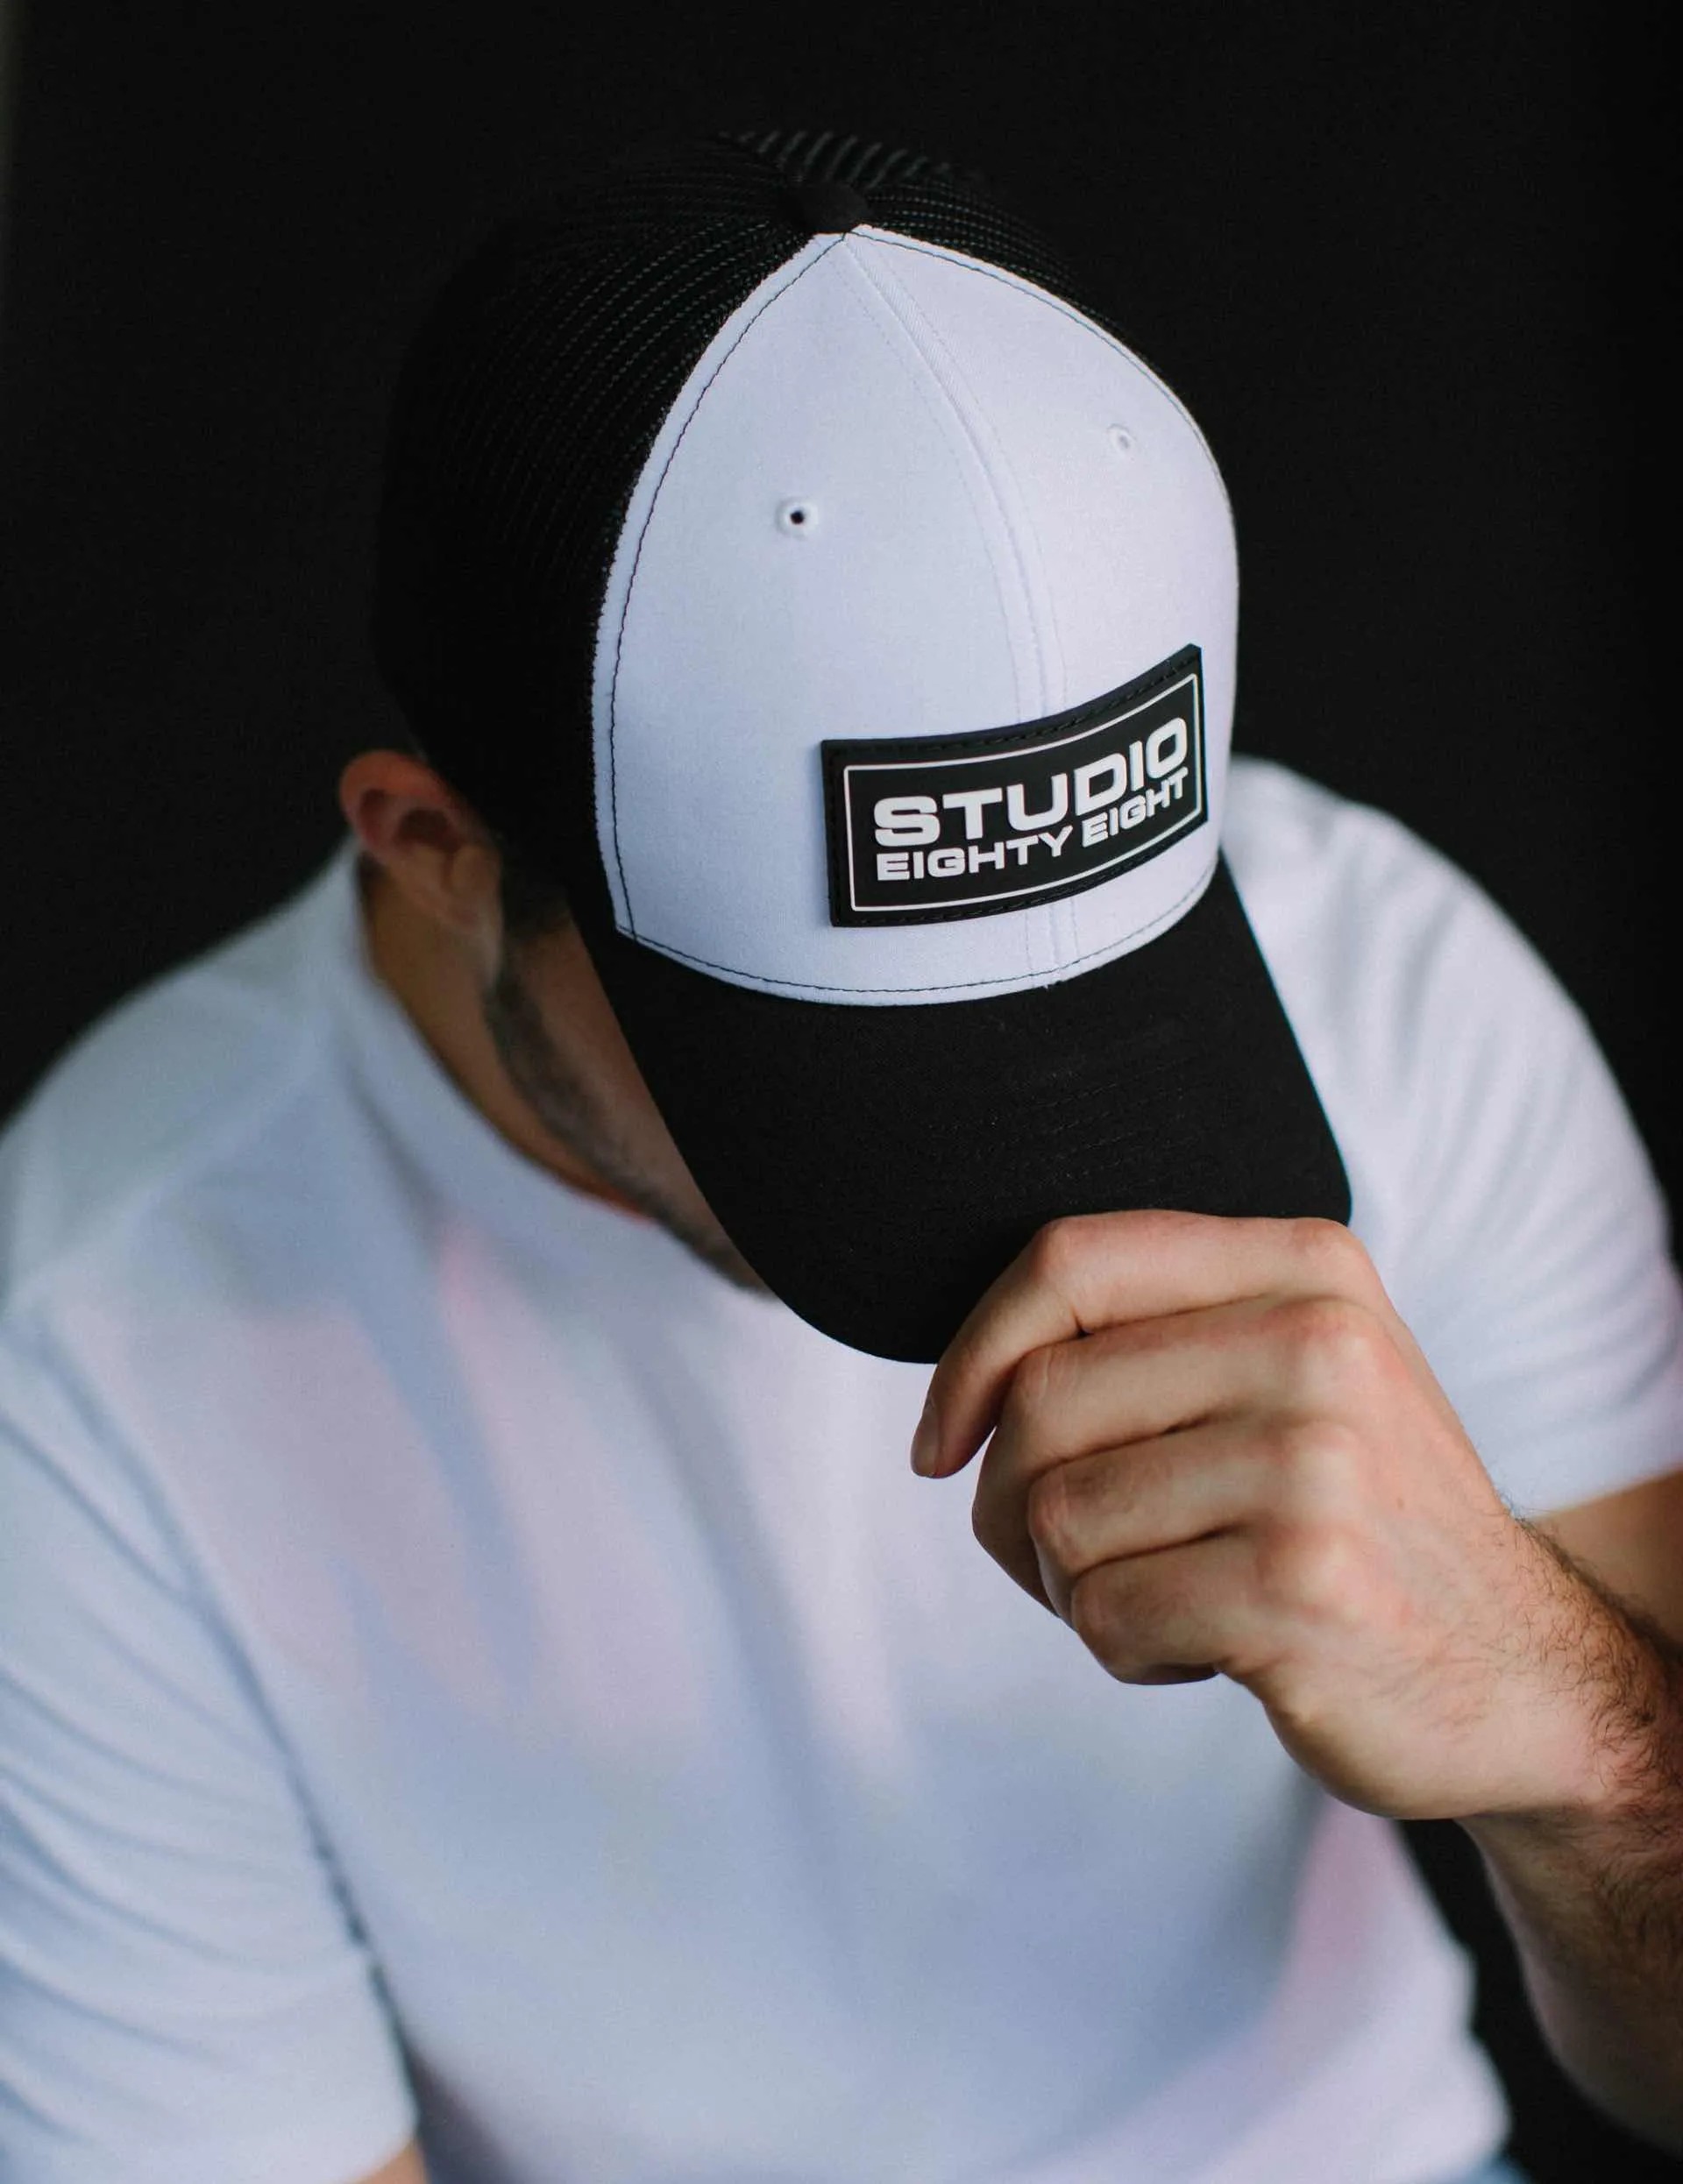 Close up photo of a man wearing a Studio EightyEight hat.